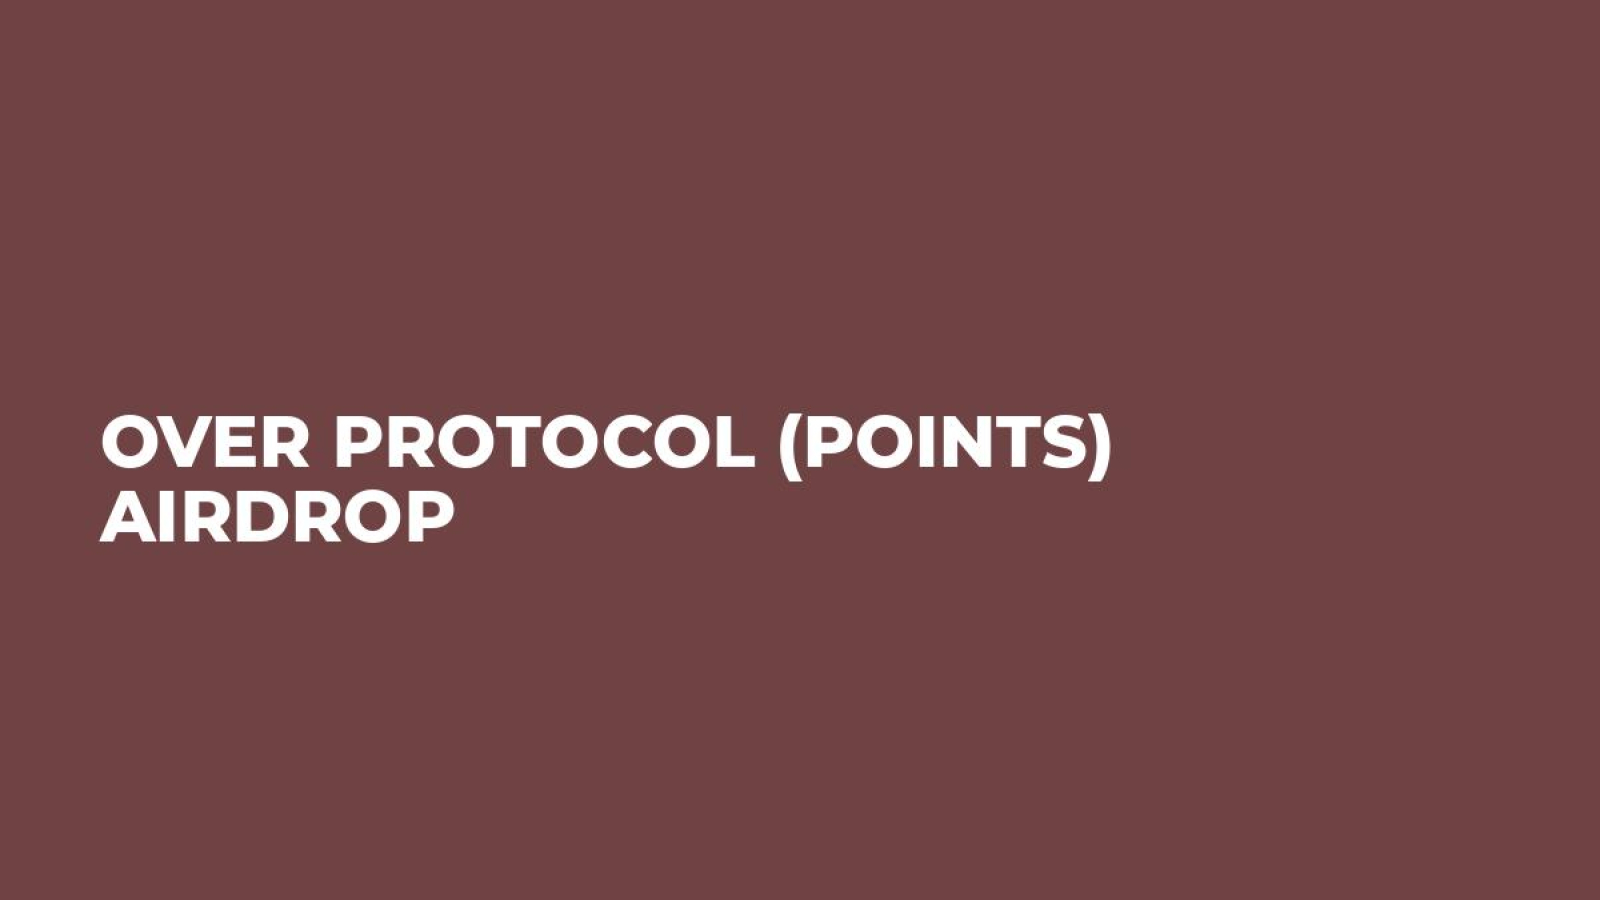 Over Protocol (Points) Airdrop